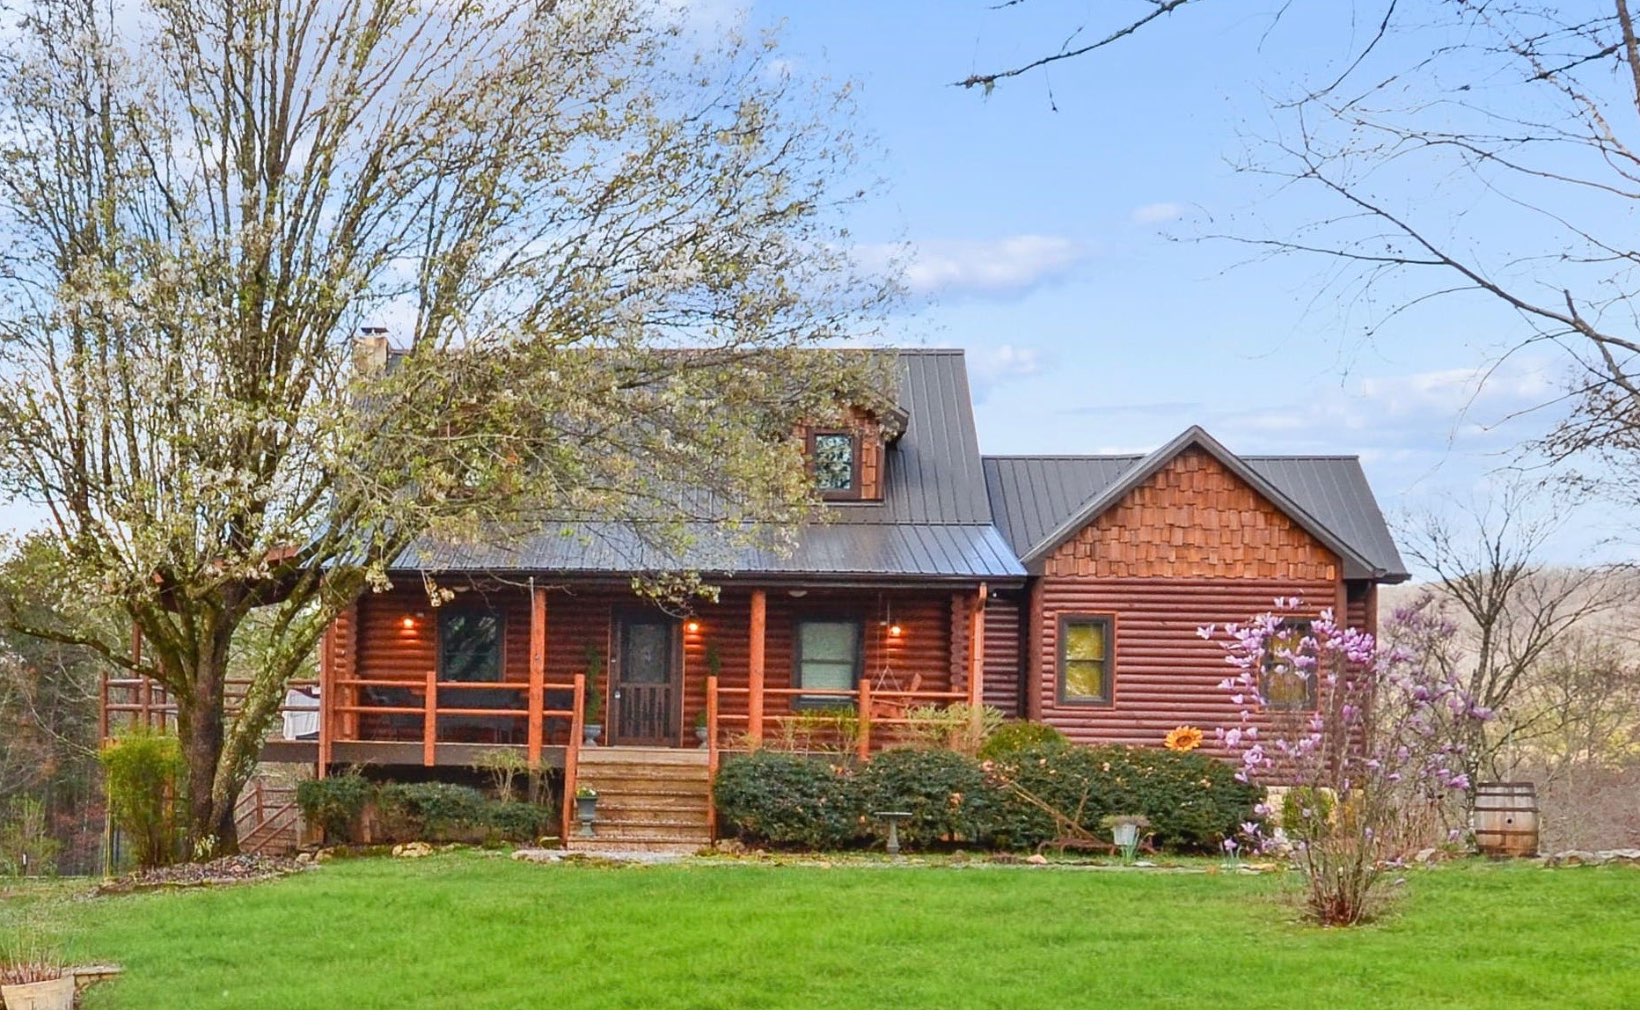 This fully renovated rustic lodge with 4 BR and 3 1/2 baths, a state-of-the-art horse farm, and 5 star fully furnished barnominium vacation rental (with income of $30K+) has it all with pasture and long range views from both properties! Fall in love w/ the lodge style living room w/ vaulted ceiling, wood accents, antler chandelier, branch railing, & masonry fireplace. The cabin also features a spacious kitchen w/ exterior deck overlooking the farm, a perfectly planned master bedroom, dream closet, master bath w/ gorgeous petrified wood & flagstone floors, an upstairs loft w/office space, a sleeping nook, and an additional bedroom with bath. The basement includes an additional family room and 2 bedrooms. There is also a planting room & stone patio w/ fire pit. Bring all the animals, as this property is complete w/ a 3 stall horse barn, fencing, tack room, outside horse wash, entertaining kitchen, & more. Above the barn is a 1 bed/1 bath open floorpan 5 star vacation rental fully furnished. Extra bath in lower barn.